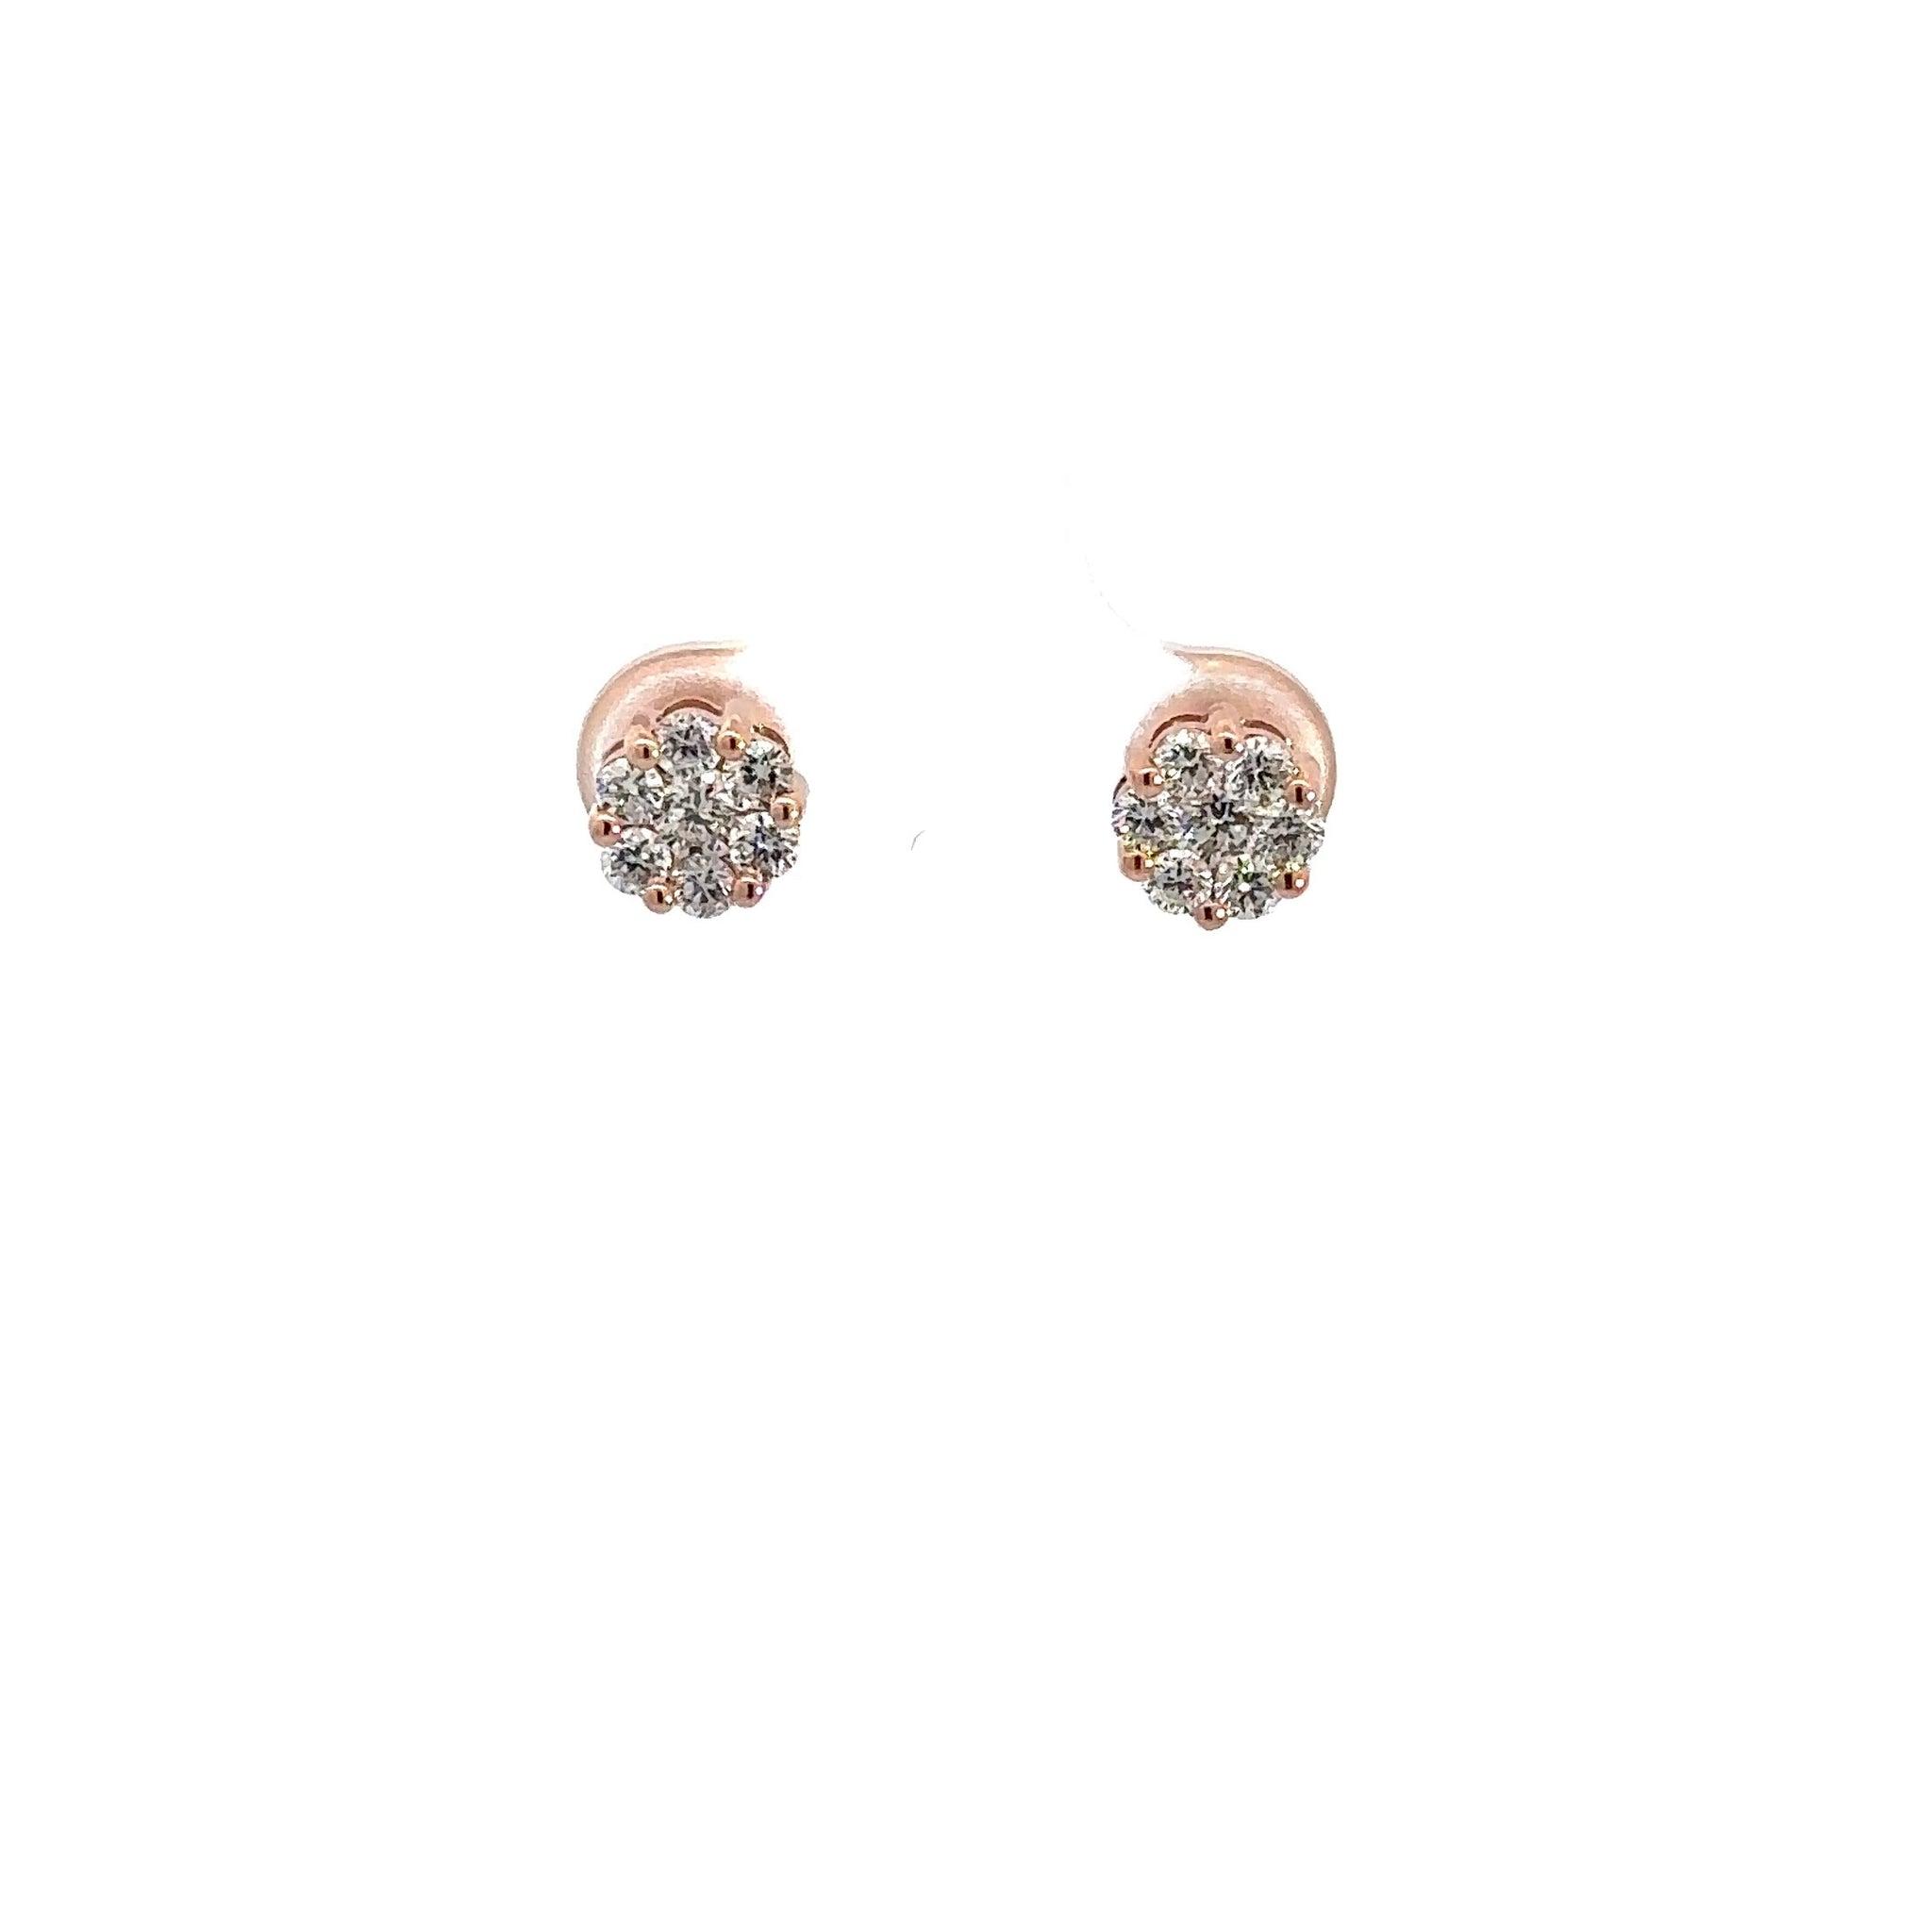 360 video of rose gold diamond floral earrings